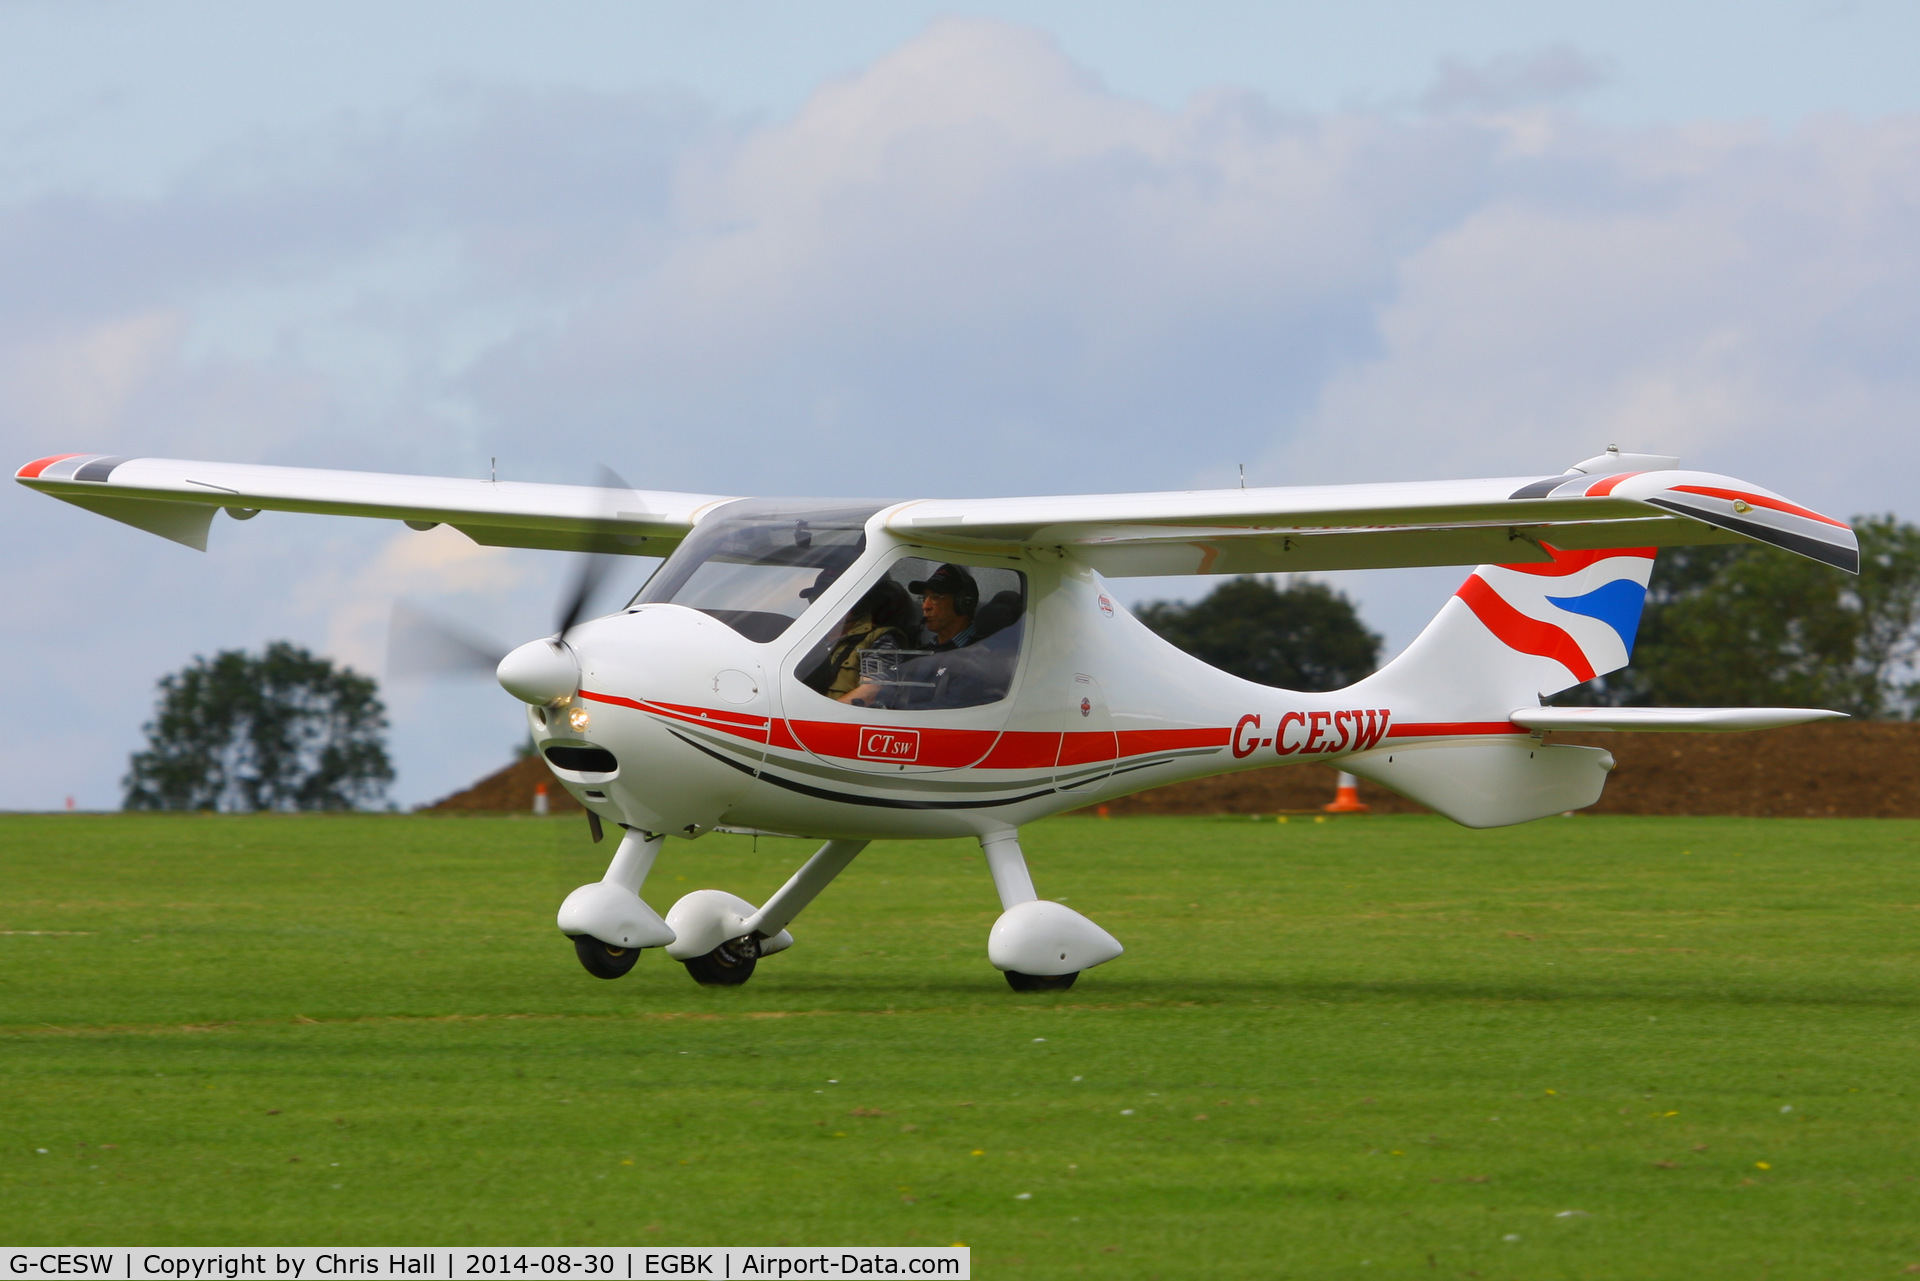 G-CESW, 2007 Flight Design CTSW C/N 8296, at the LAA Rally 2014, Sywell